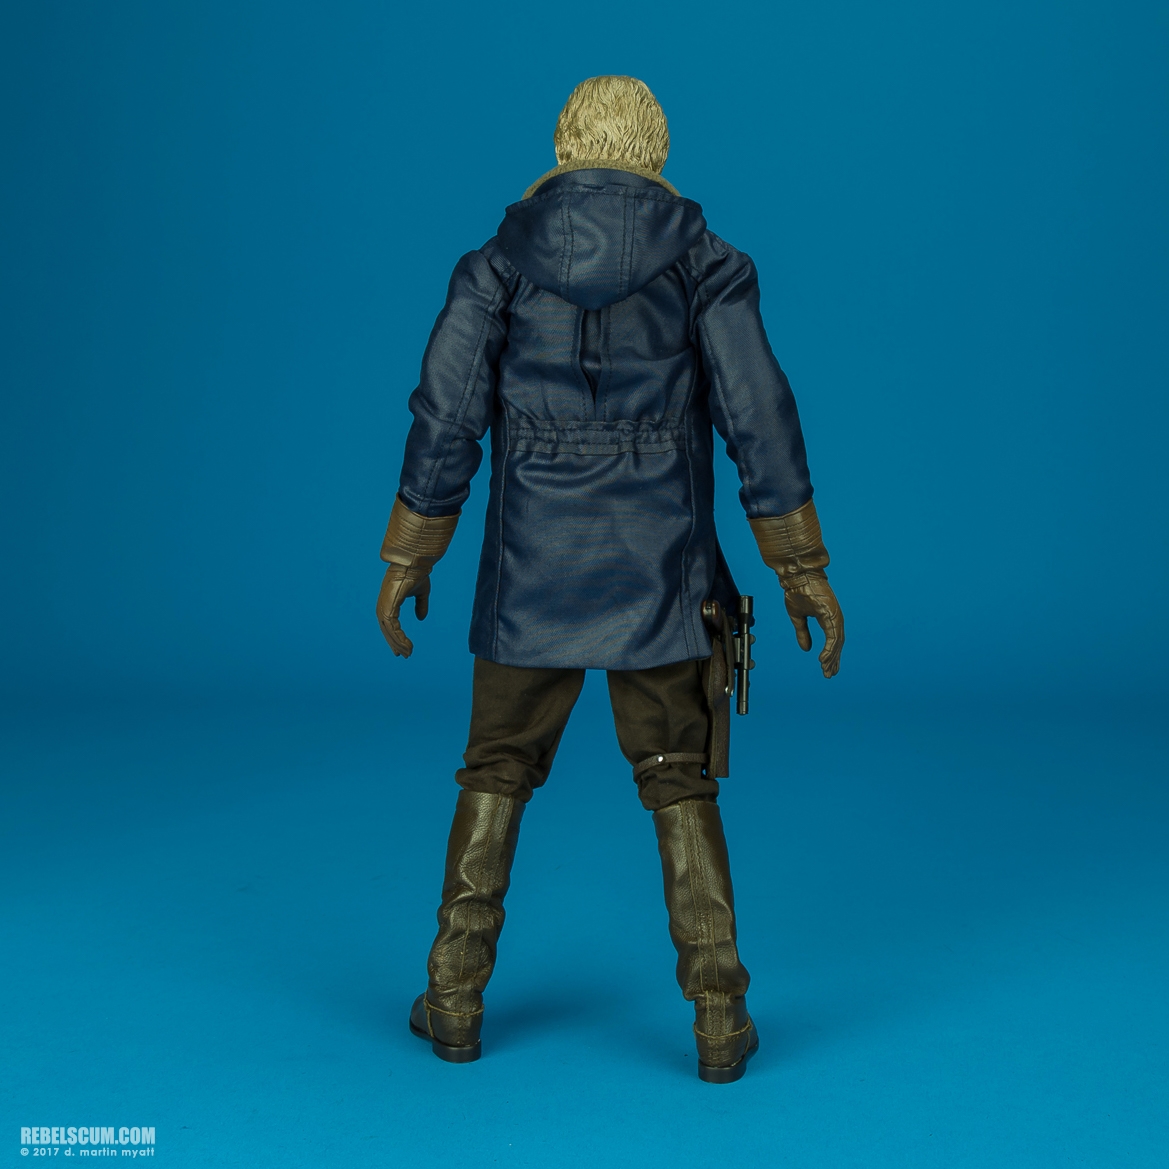 MMS376-Han-Solo-Chewbacca-The-Force-Awakens-Hot-Toys-008.jpg